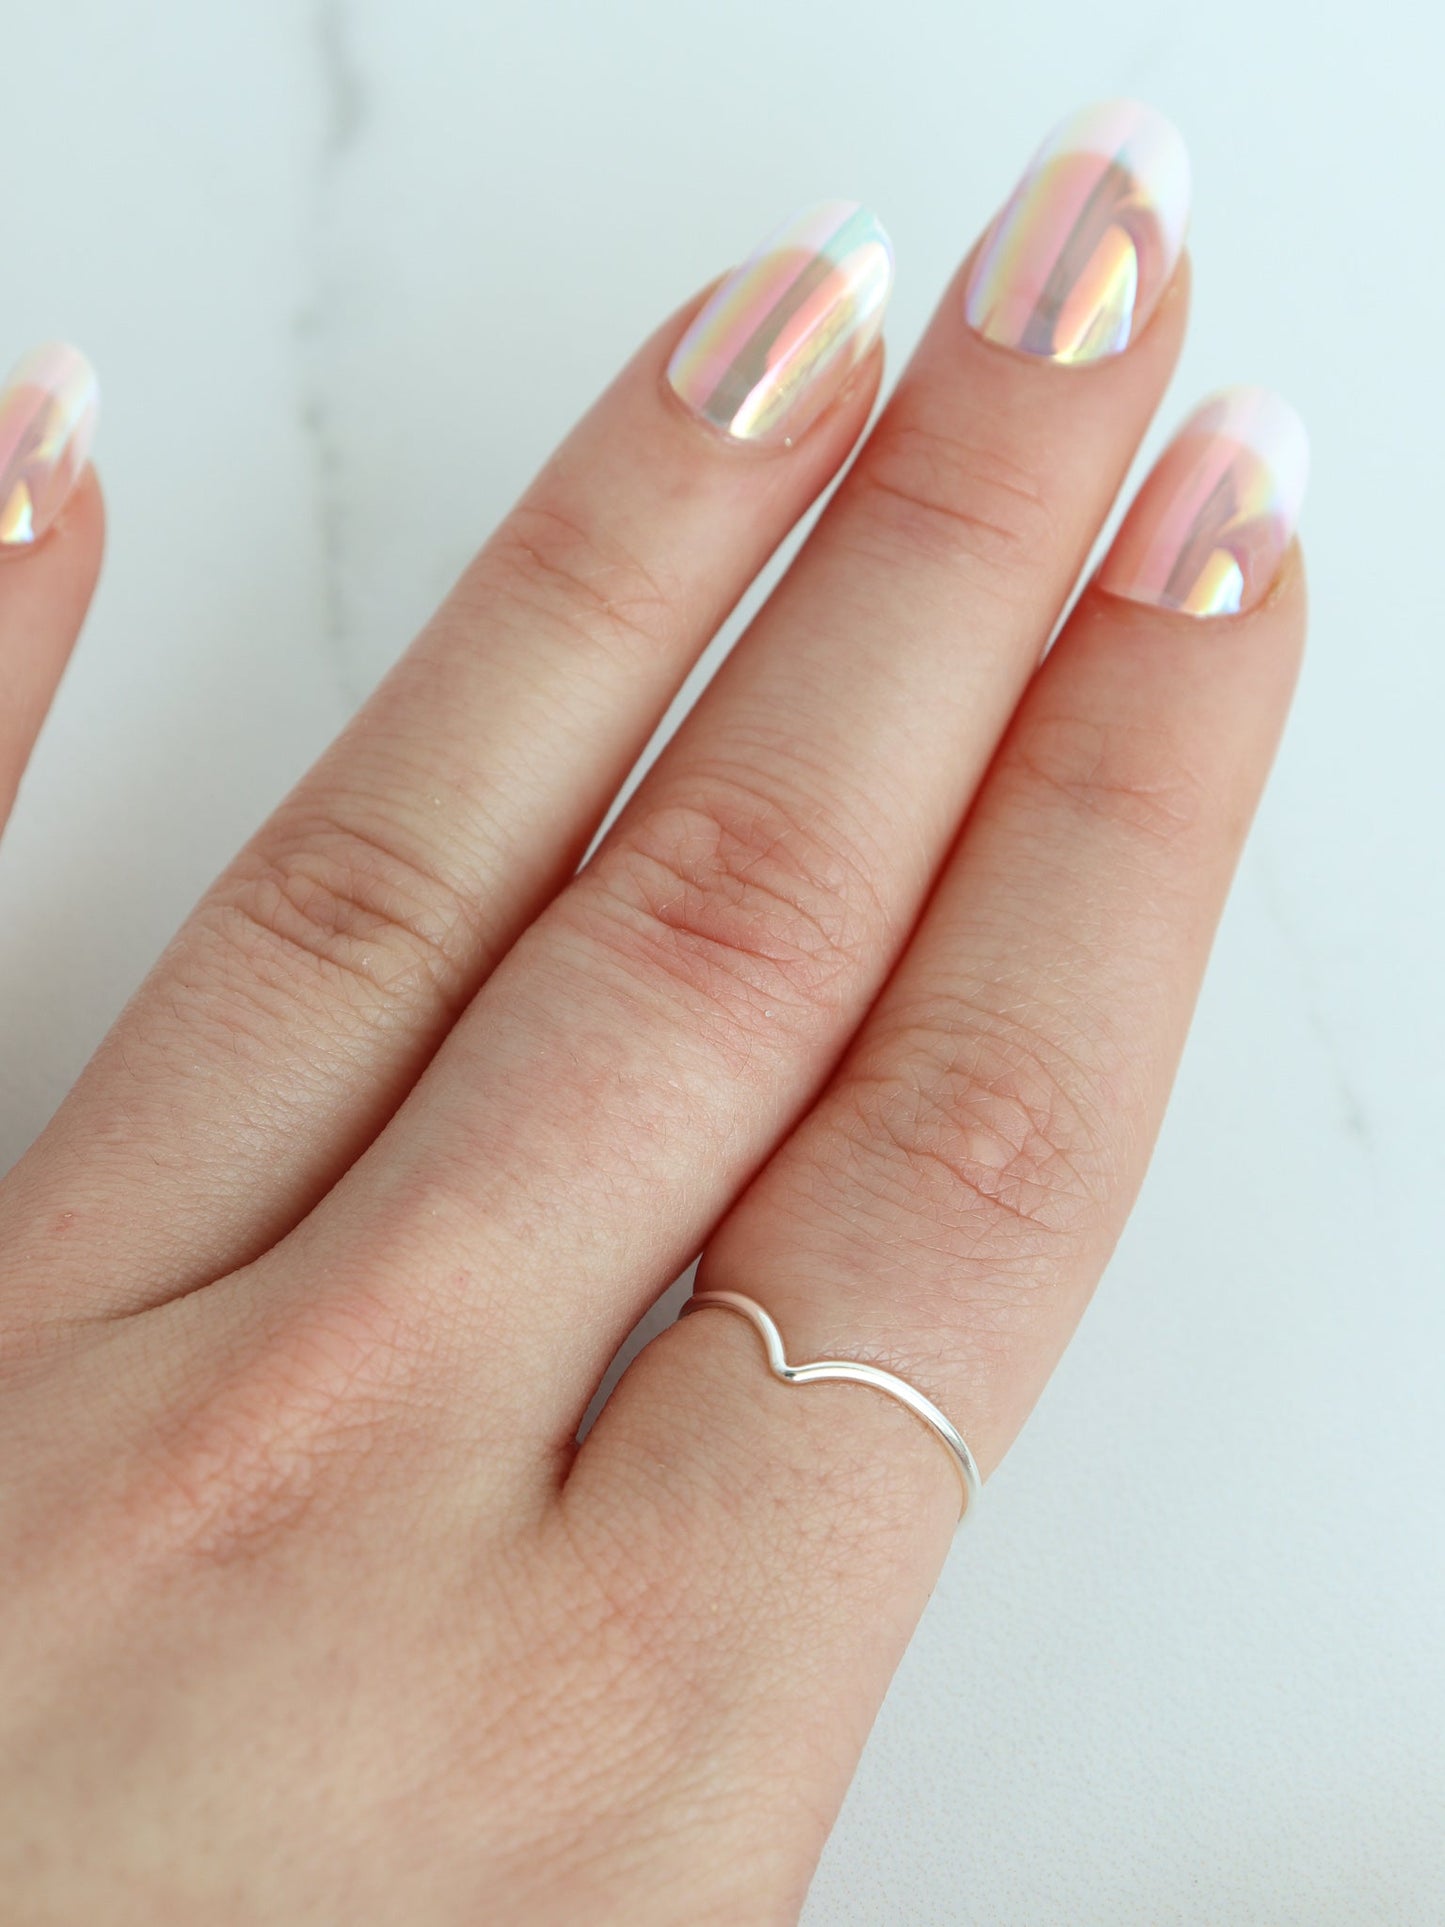 Chevron - Sterling Silver Stacking Ring - Gemlet